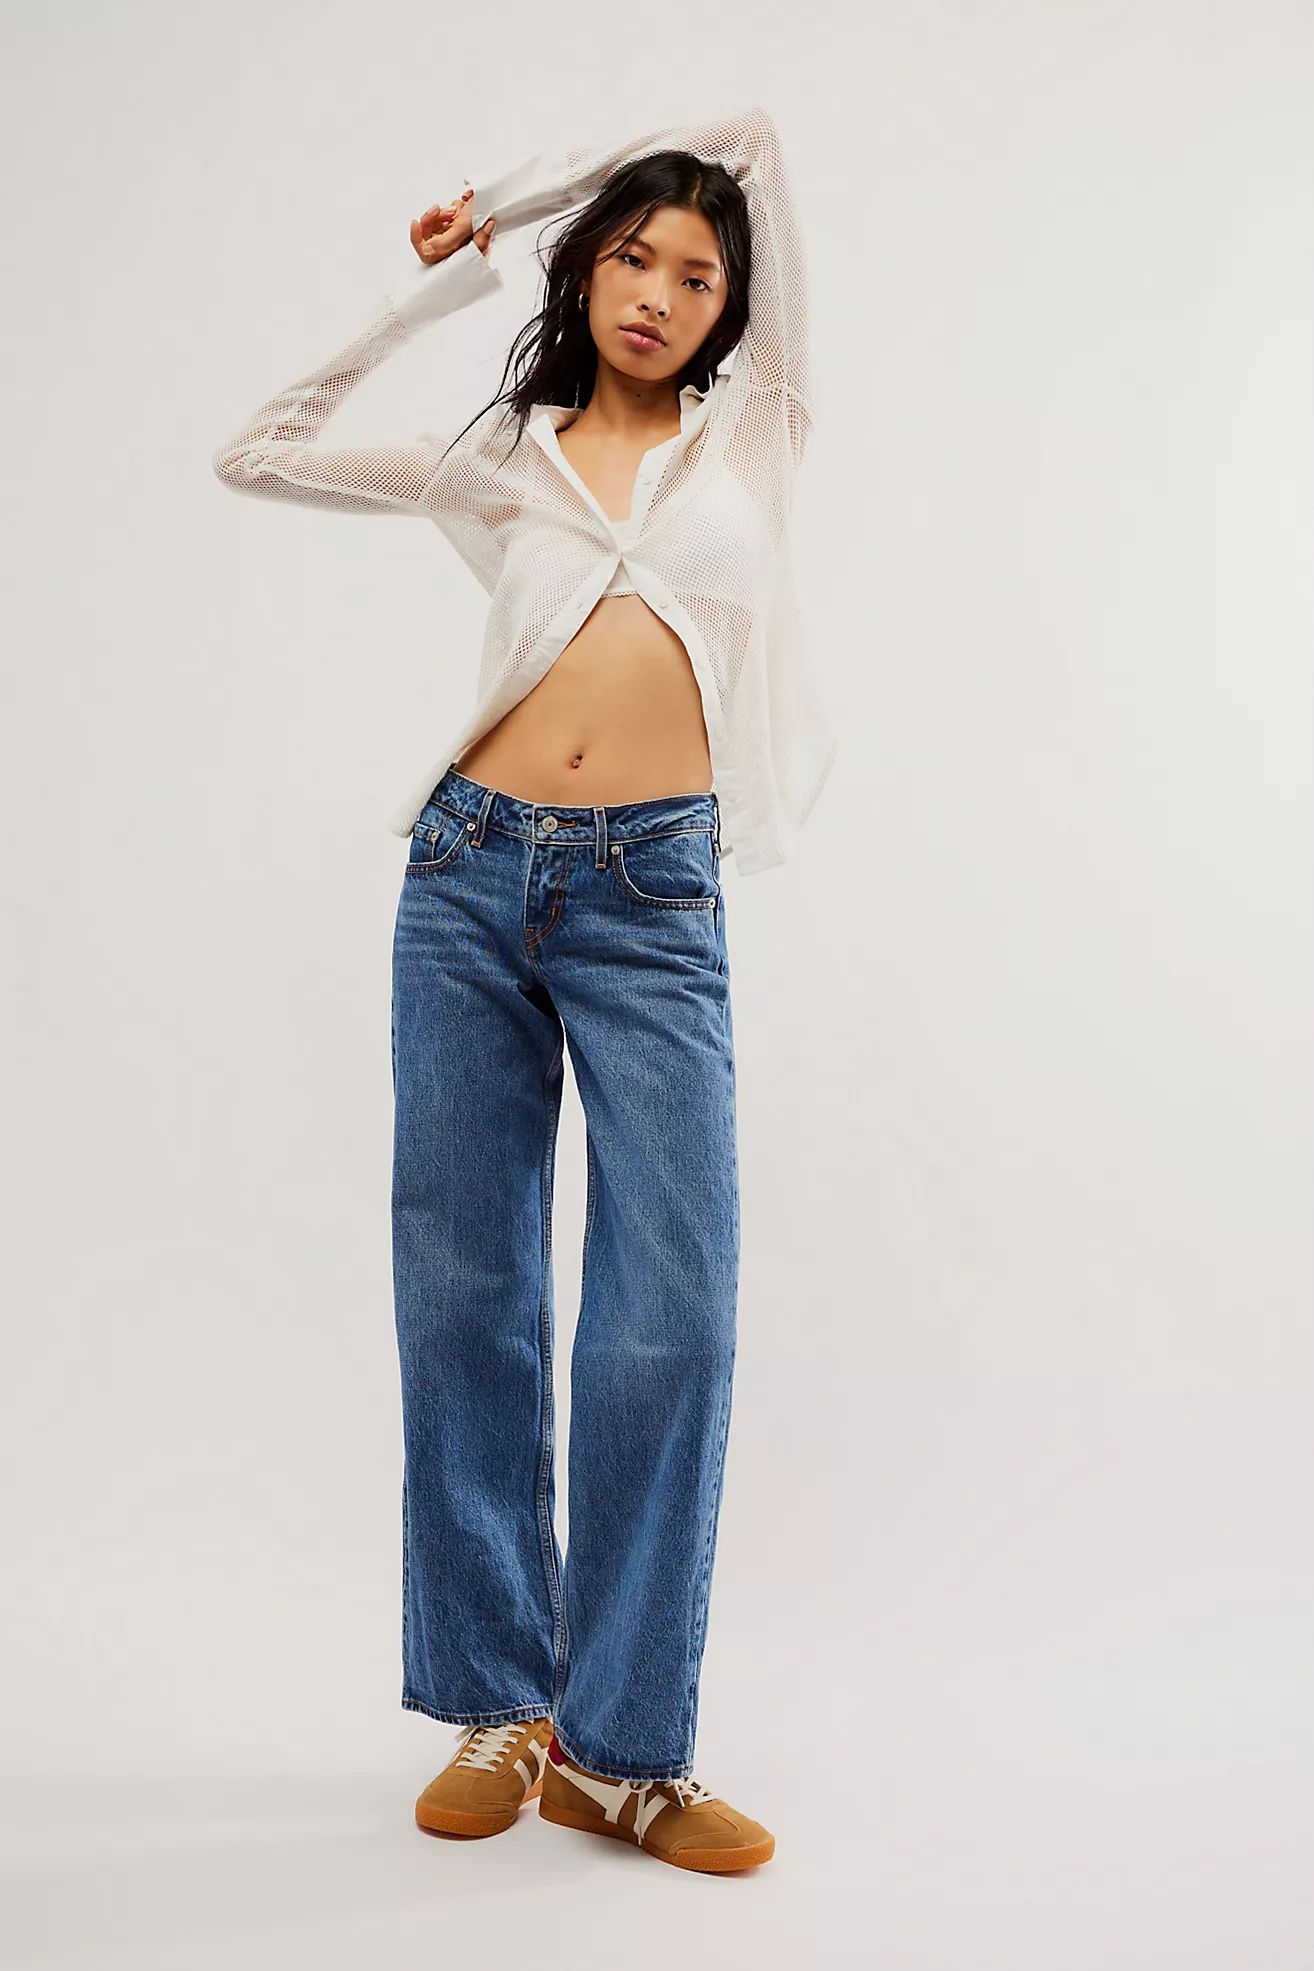 Shop all Levi's | Free People (Global - UK&FR Excluded)